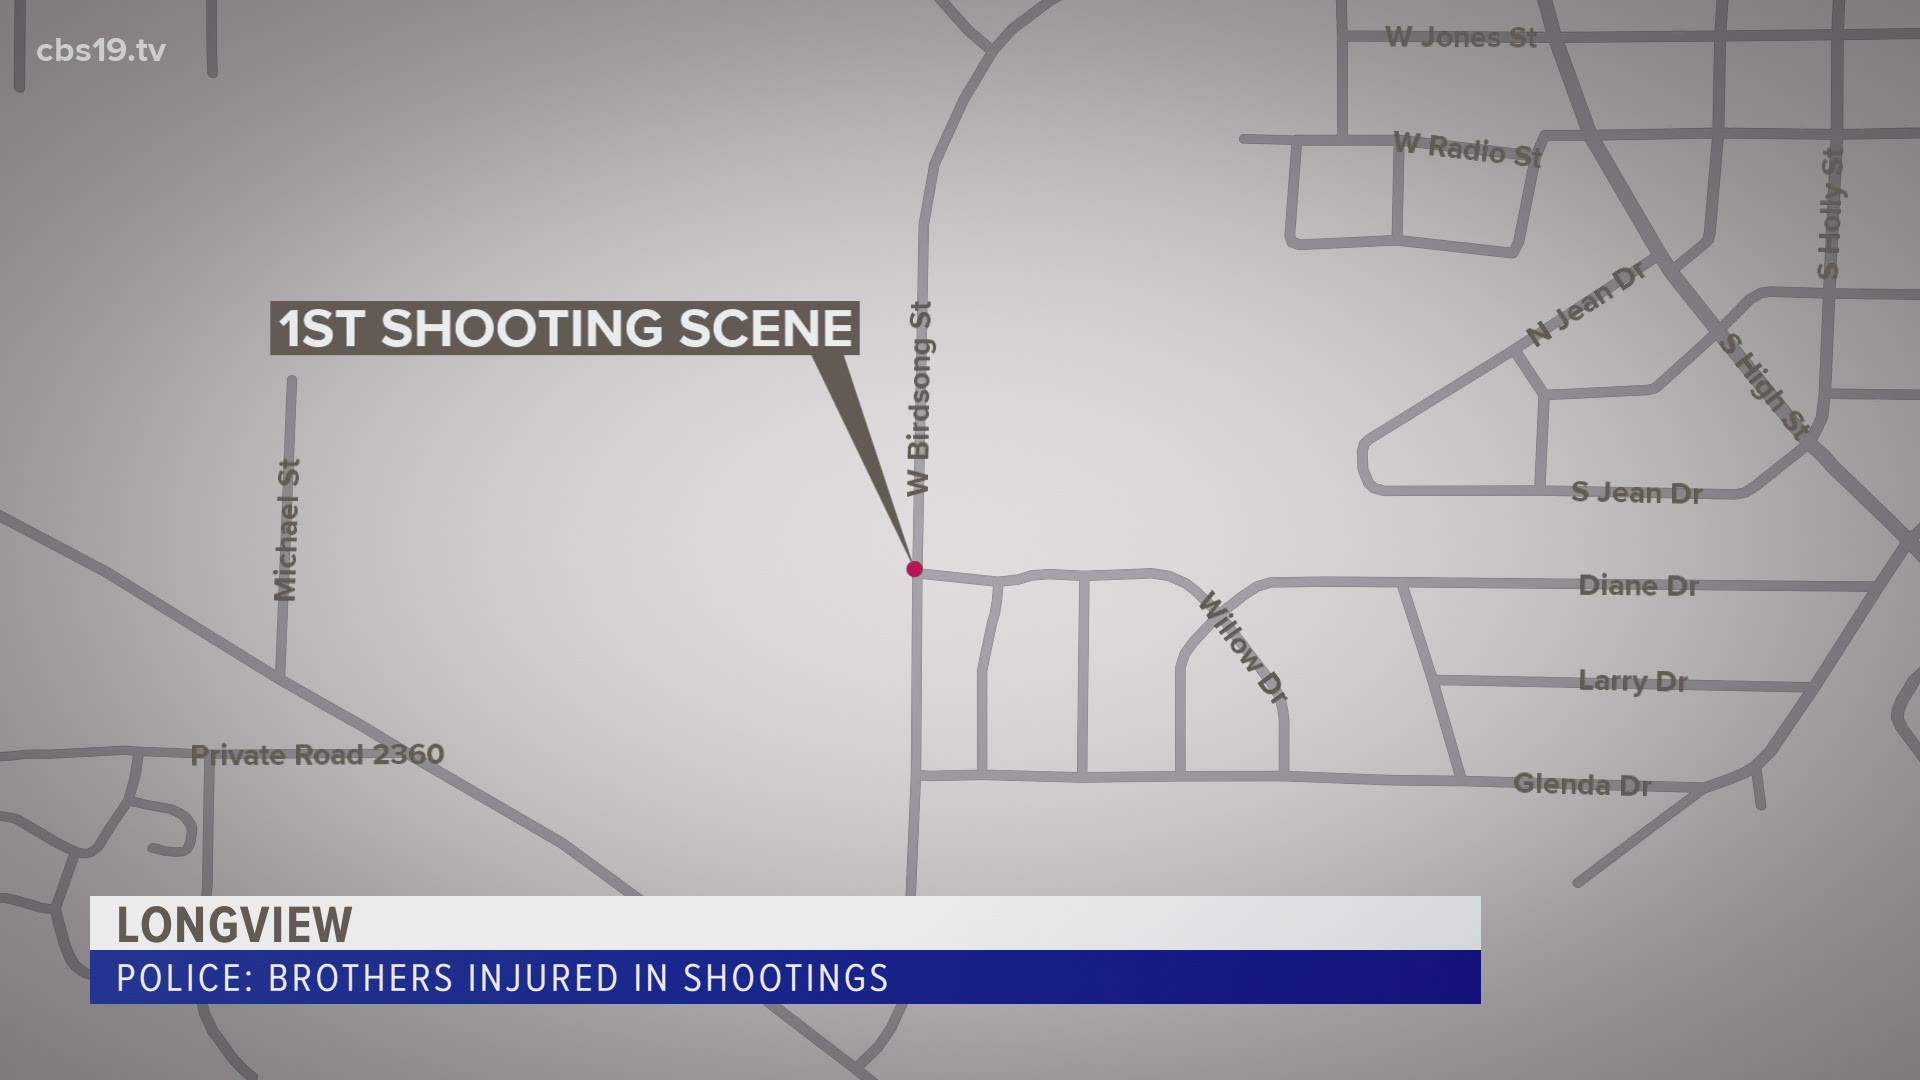 The two shootings occurred on Birdsong Street in Longview.